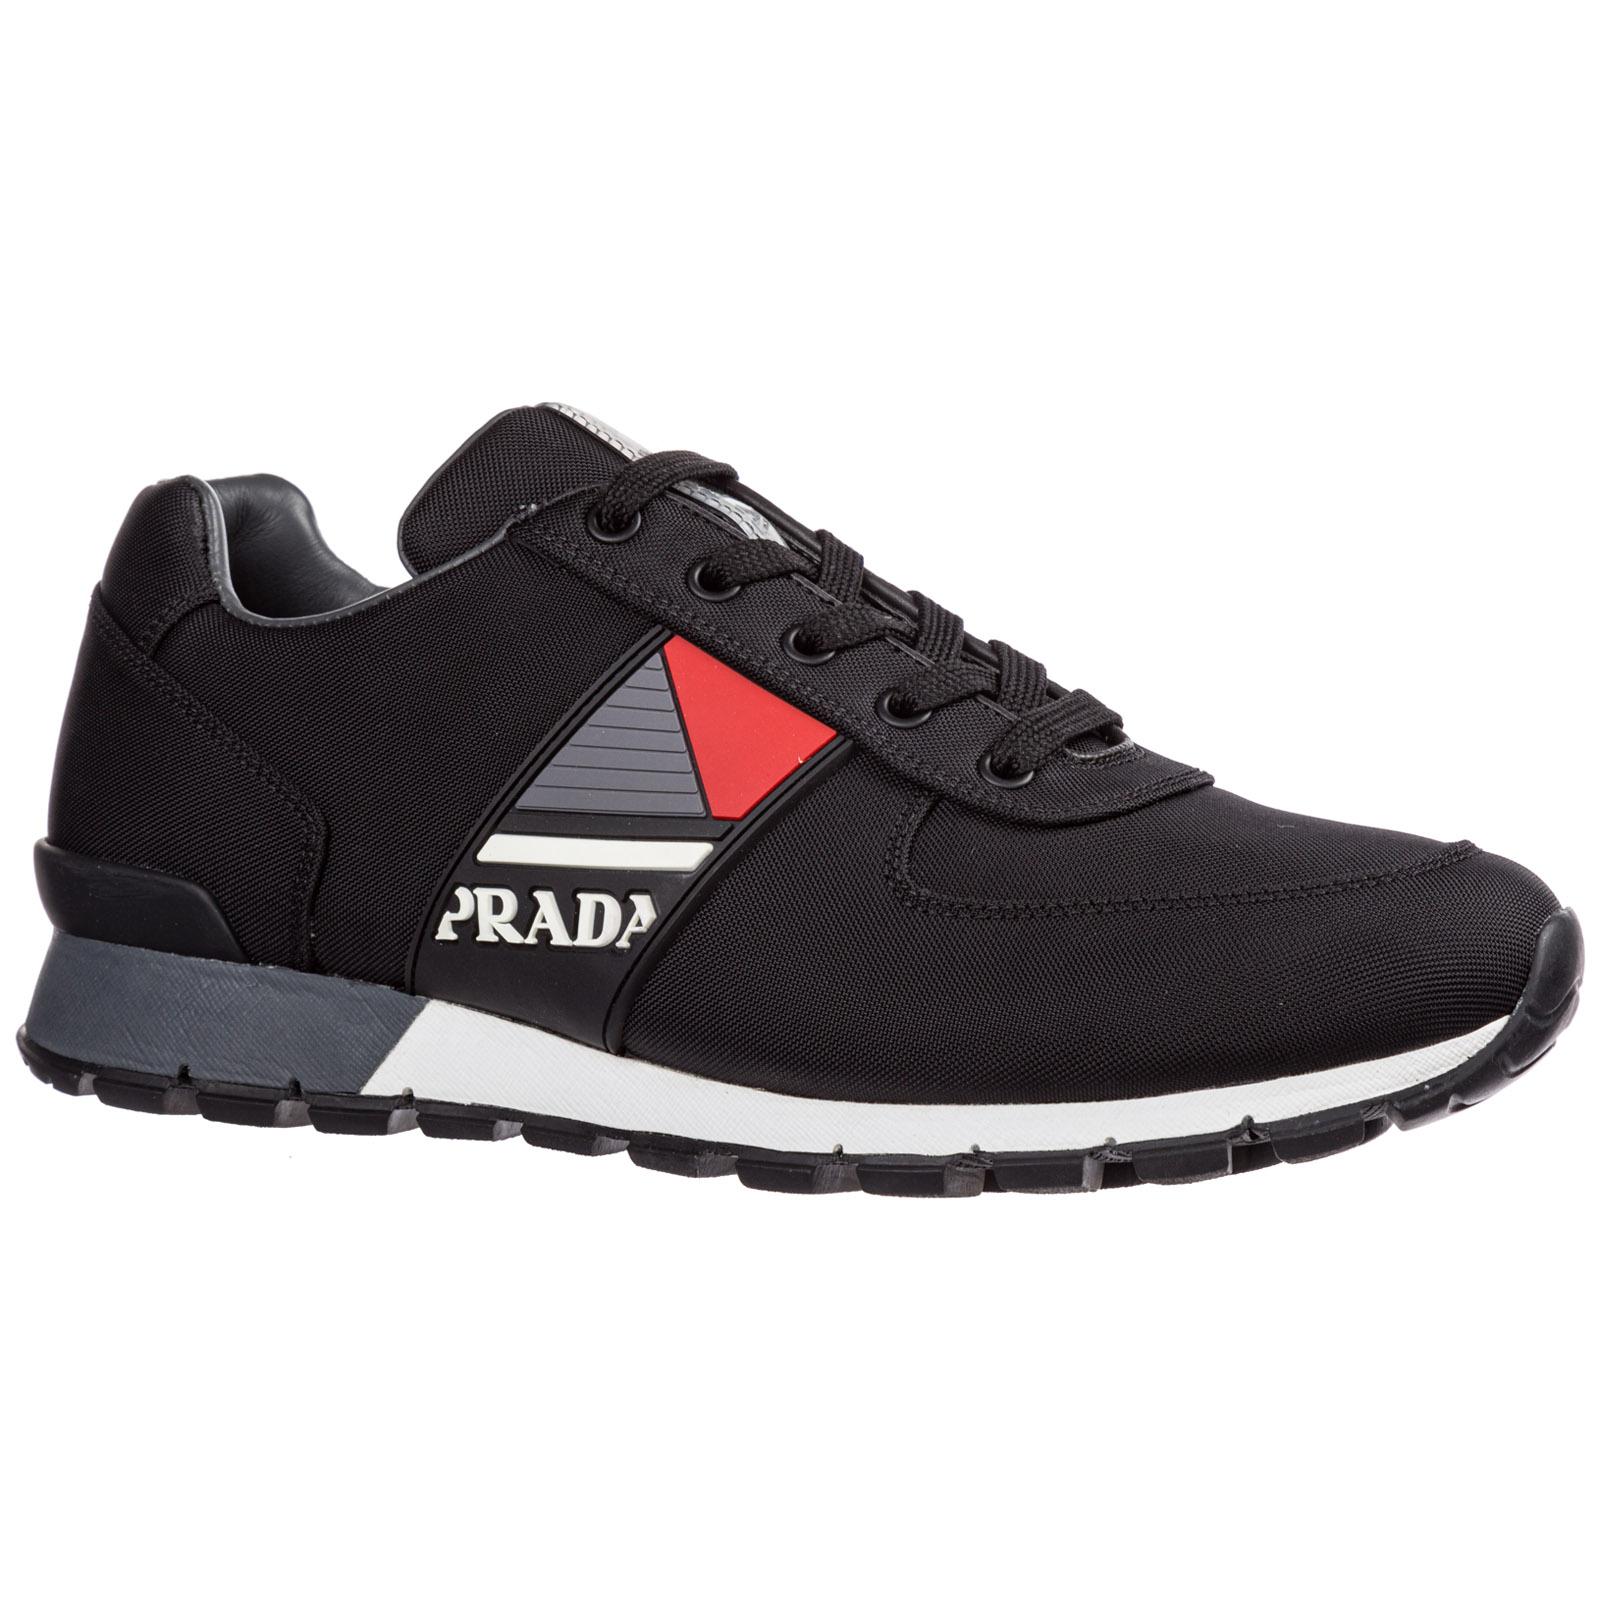 Prada Synthetic Men's Shoes Trainers Sneakers Match Race in Nero (Black ...